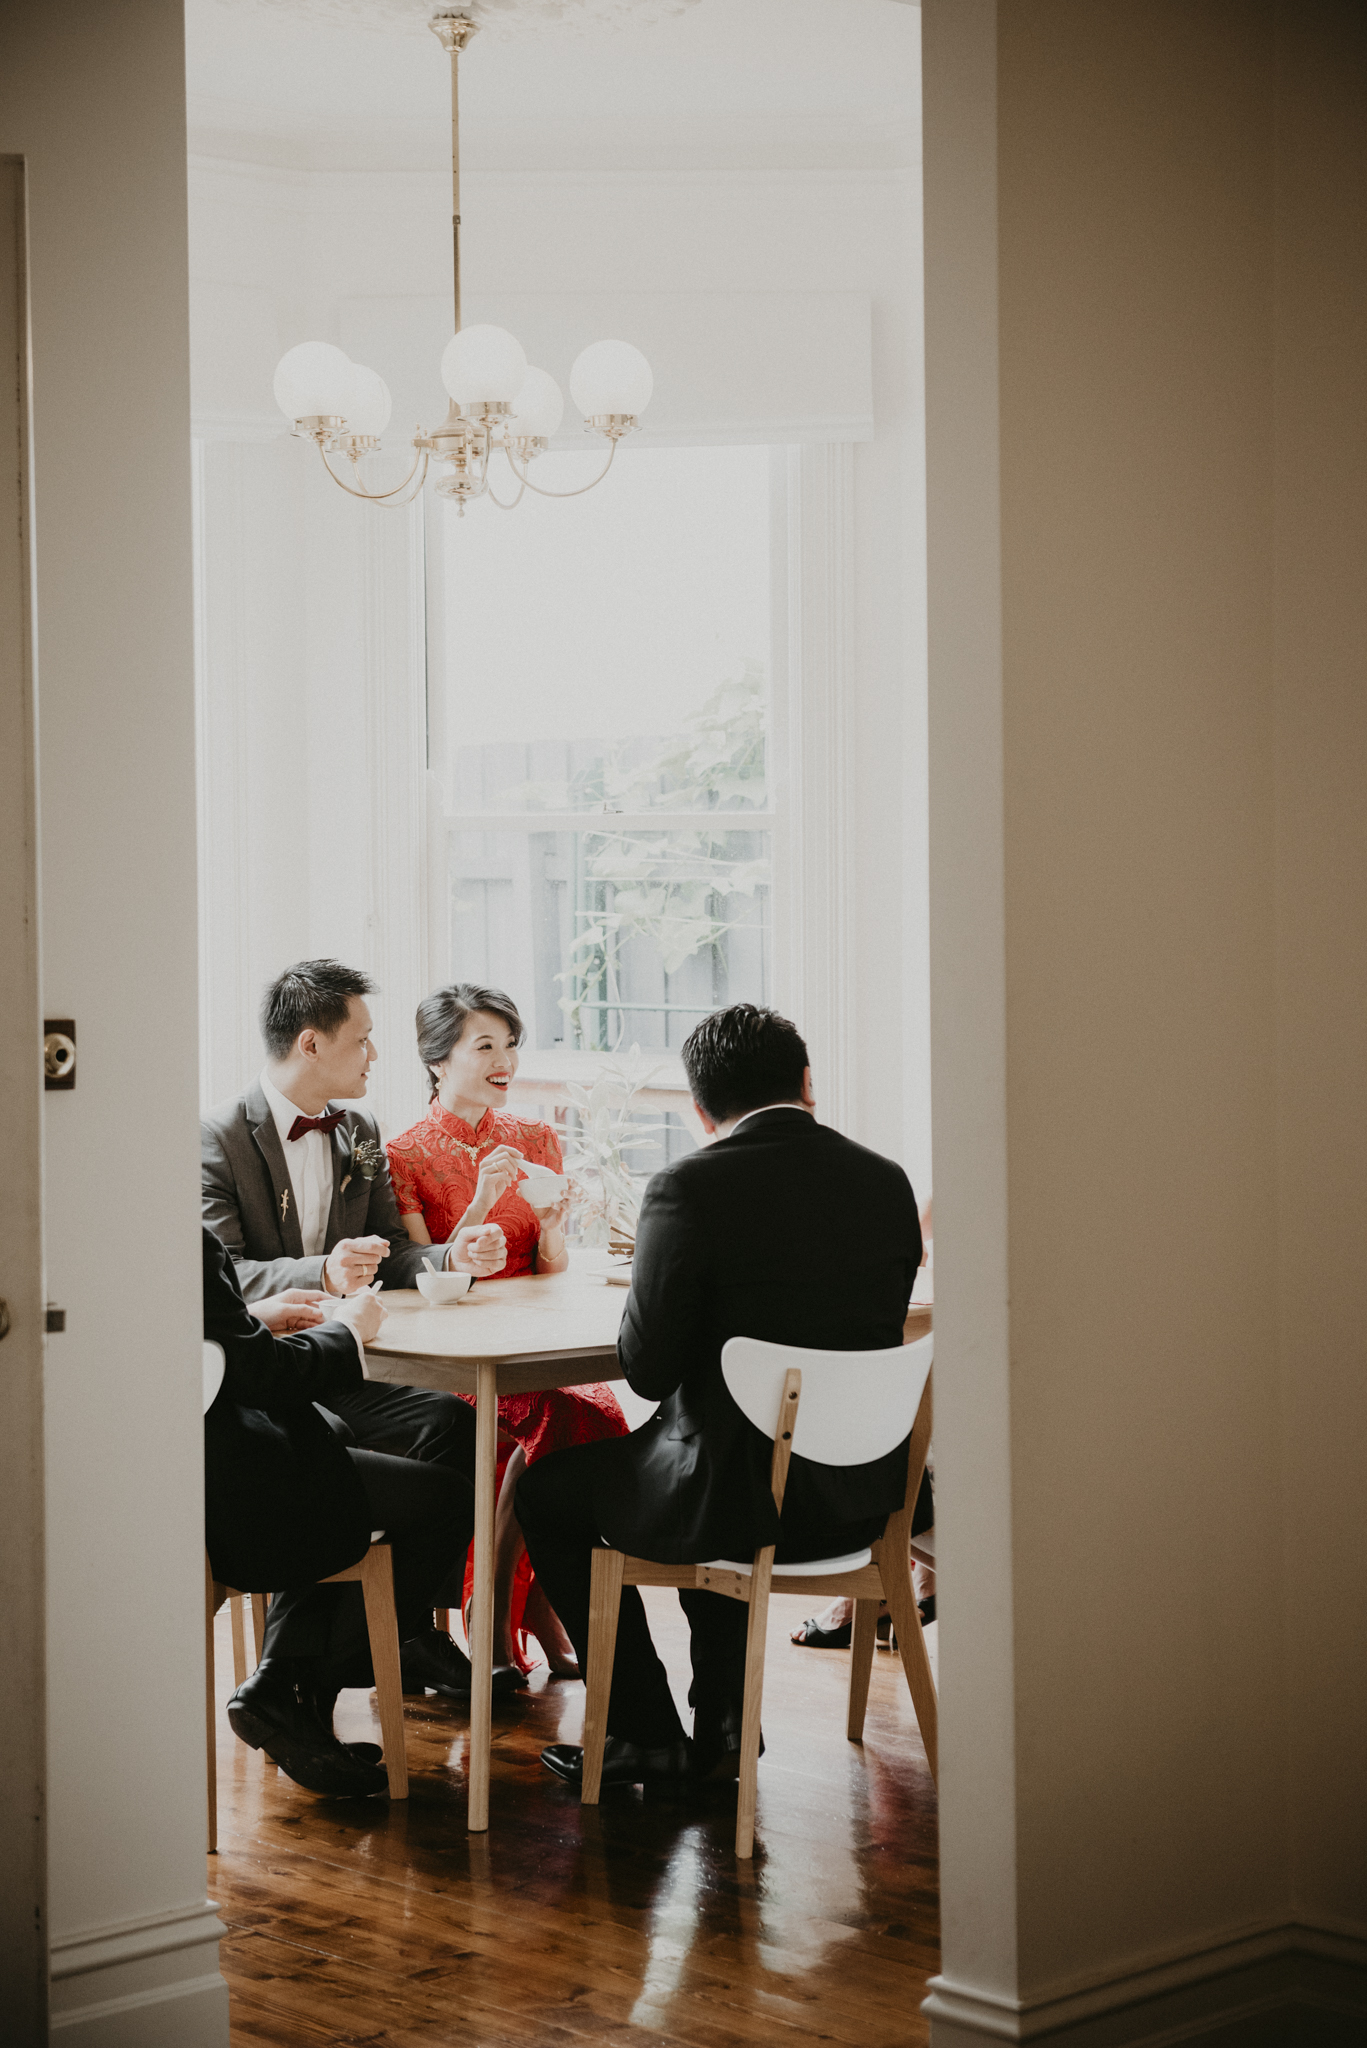 agnes-duy-15th-december-2018-chinese-vietnamese-wedding-tea-ceremony-yarraville-home-house-documentary-candid-photographer-sarah-matler-photography-47